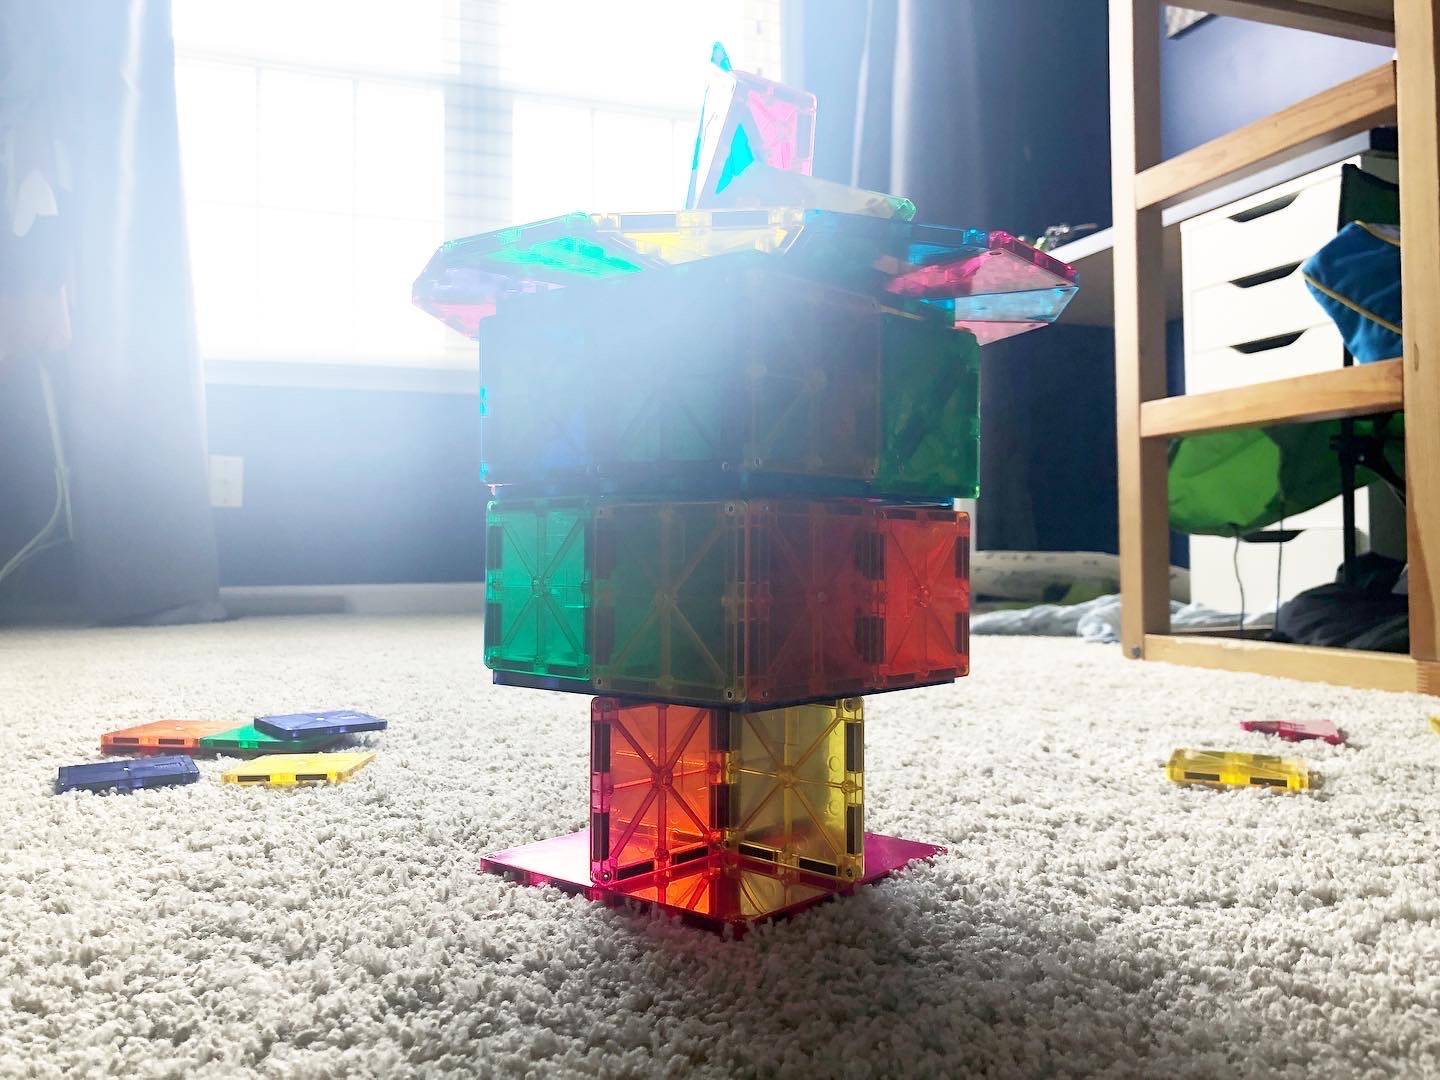 A structure made from the toy Magnatile is on the carpeted floor of a child's bedroom. Photo by Alyssa Buckley.